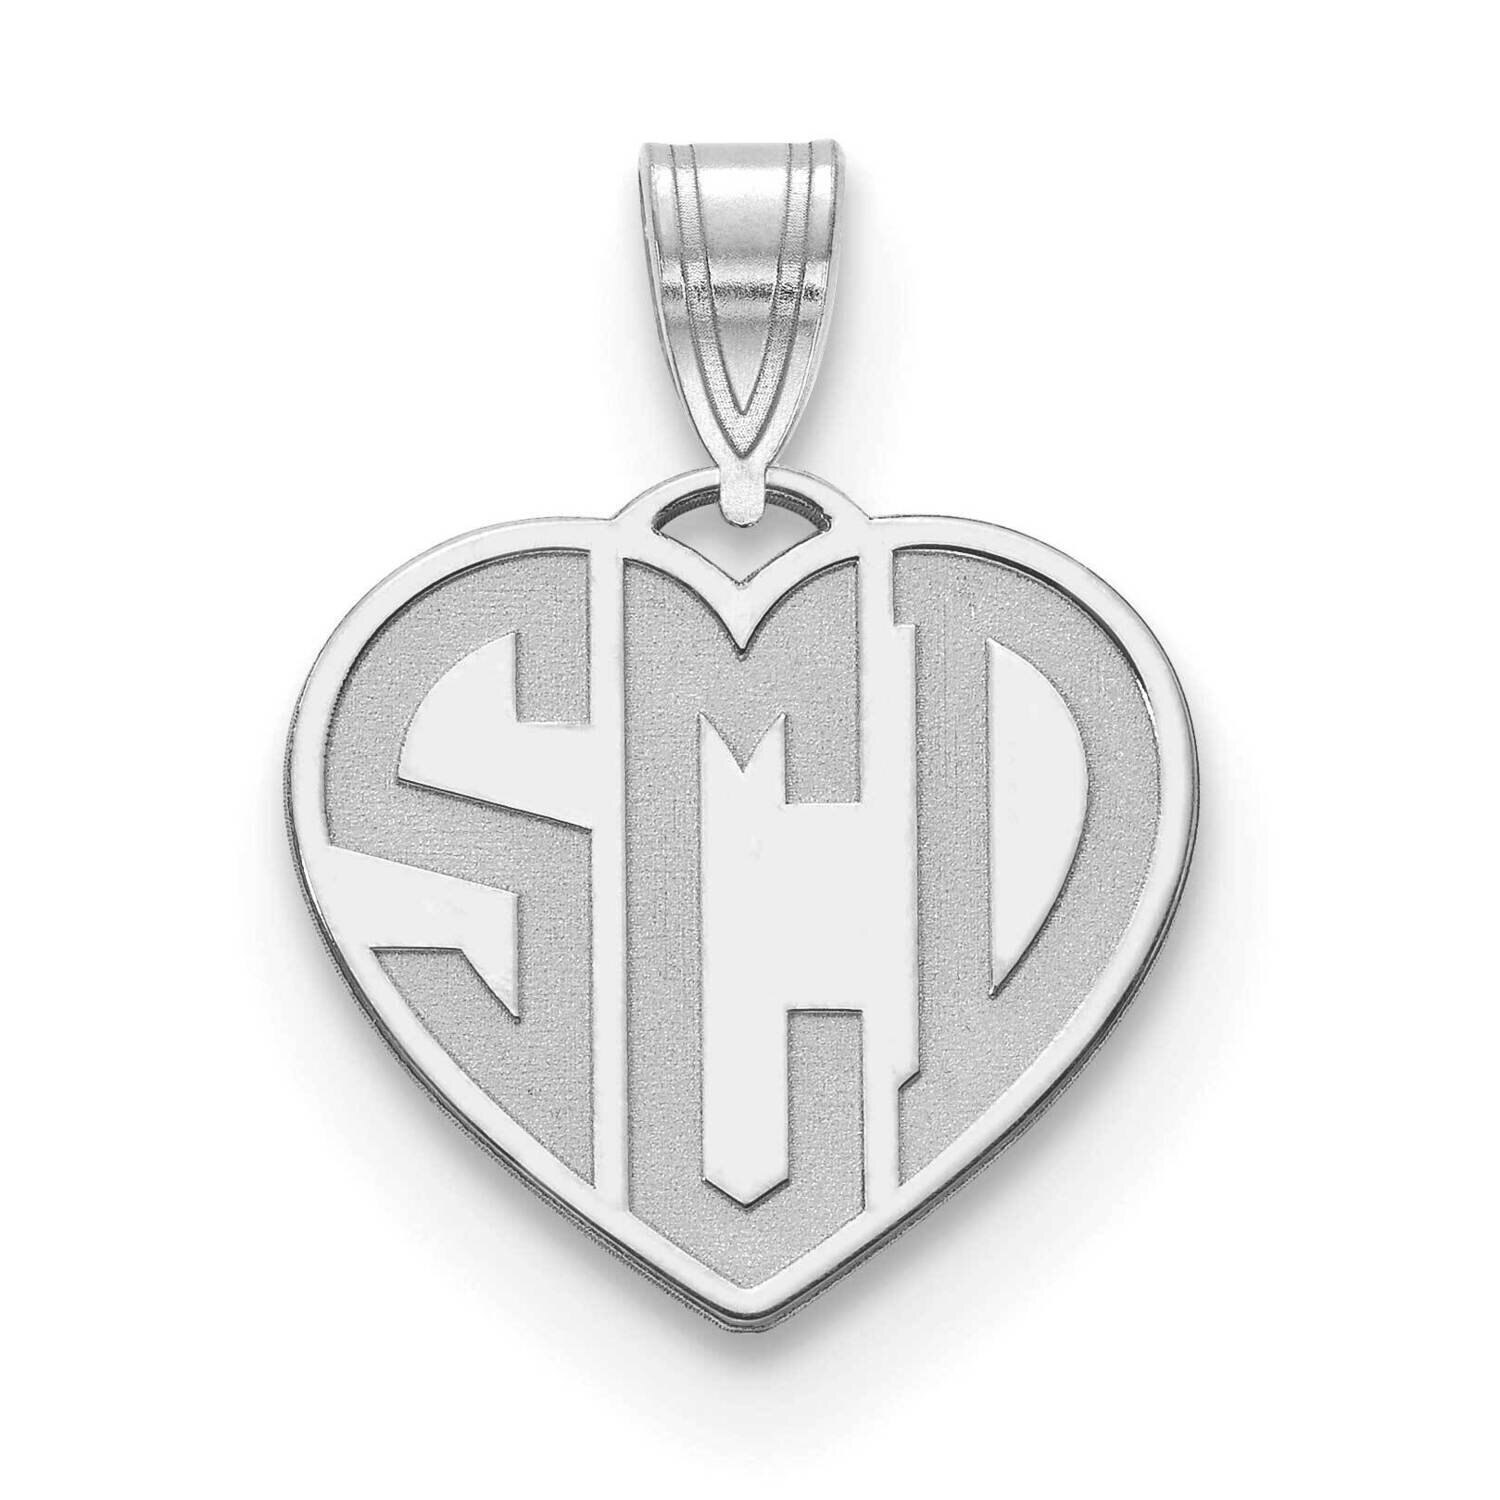 Etched Heart Monogram Charm Sterling Silver Rhodium-plated XNA894SS